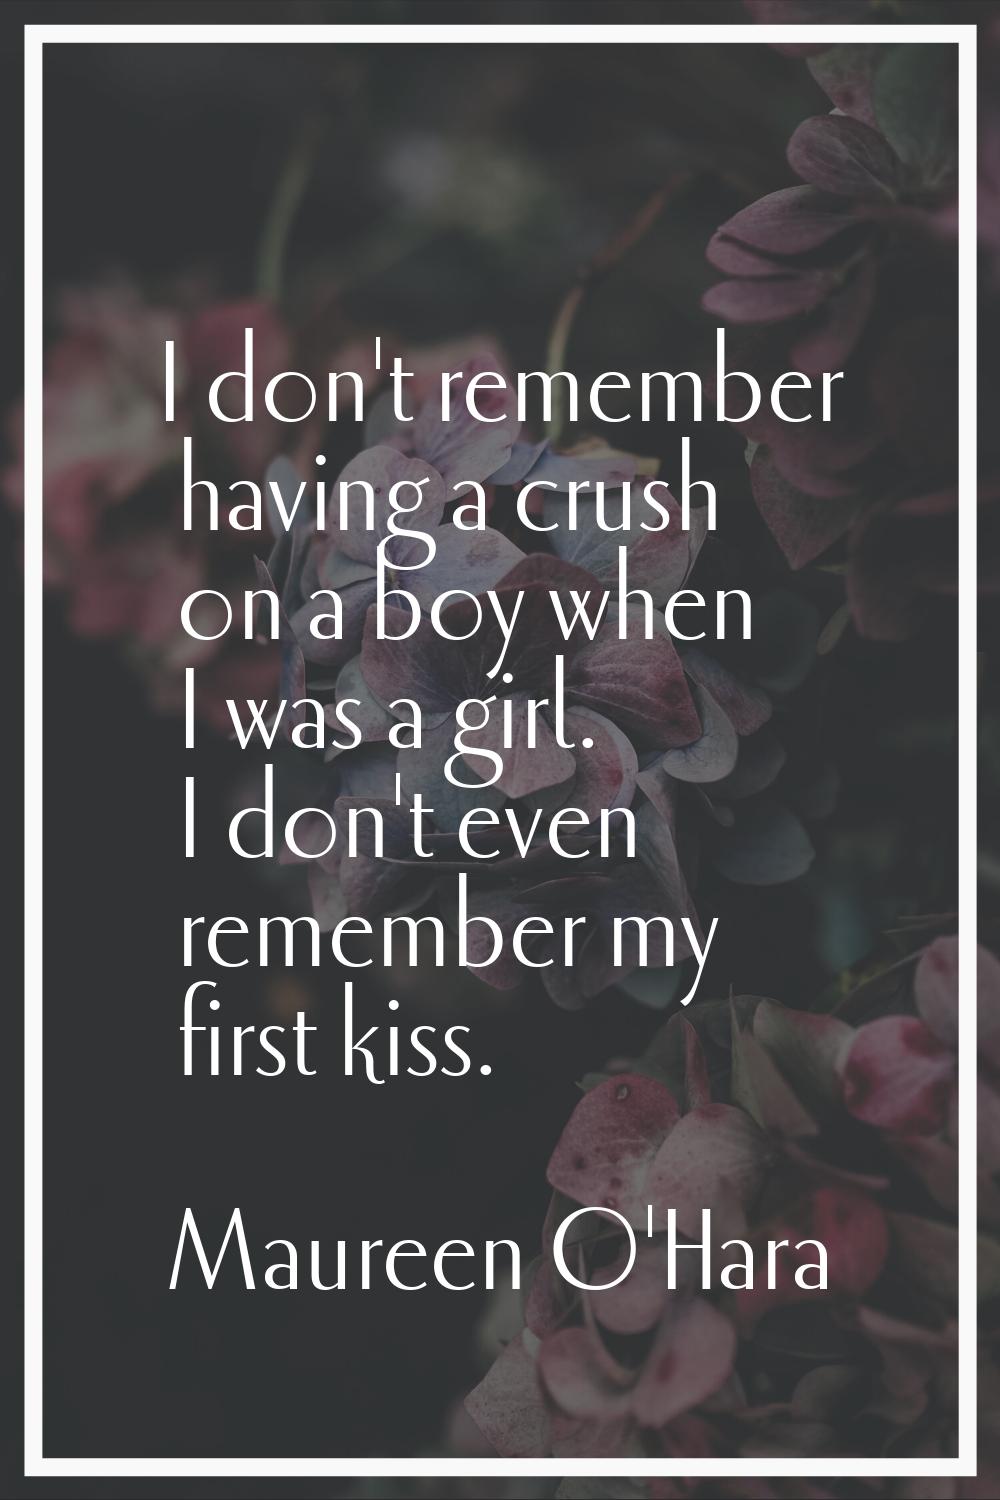 I don't remember having a crush on a boy when I was a girl. I don't even remember my first kiss.